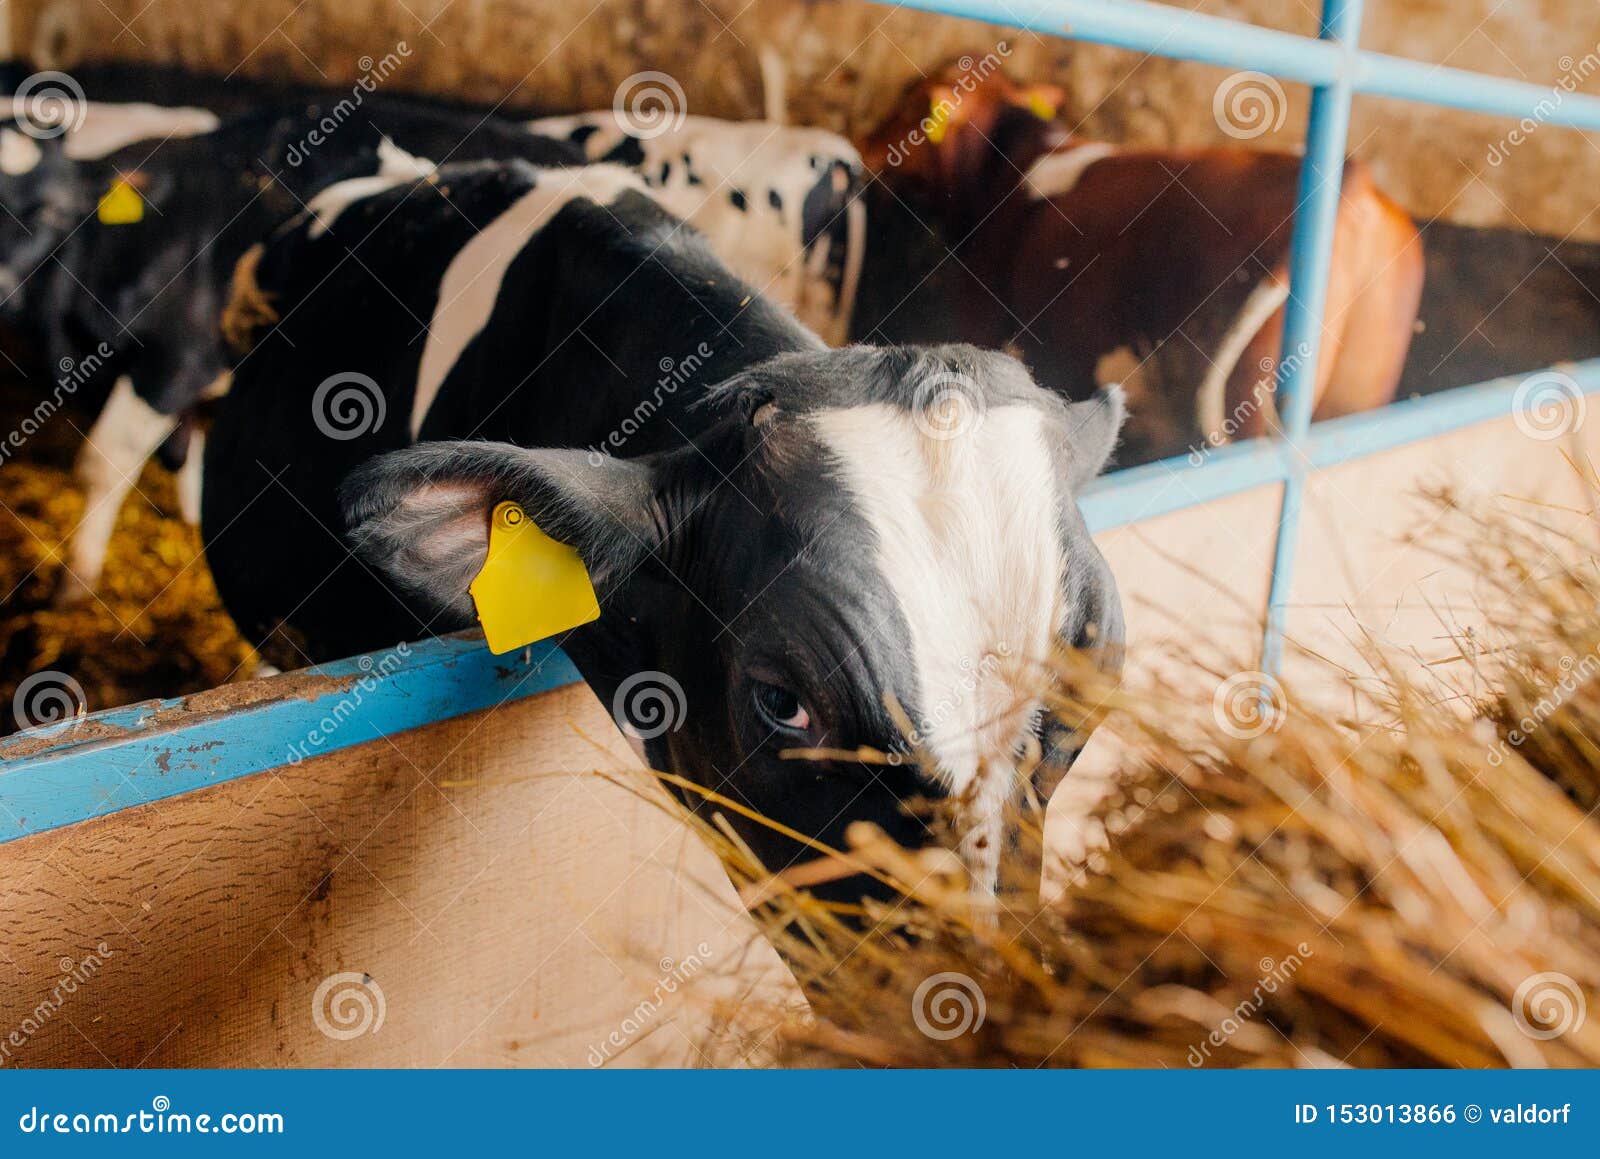 Cow eating hay in barn stock photo. Image of farm, groomed - 153013866